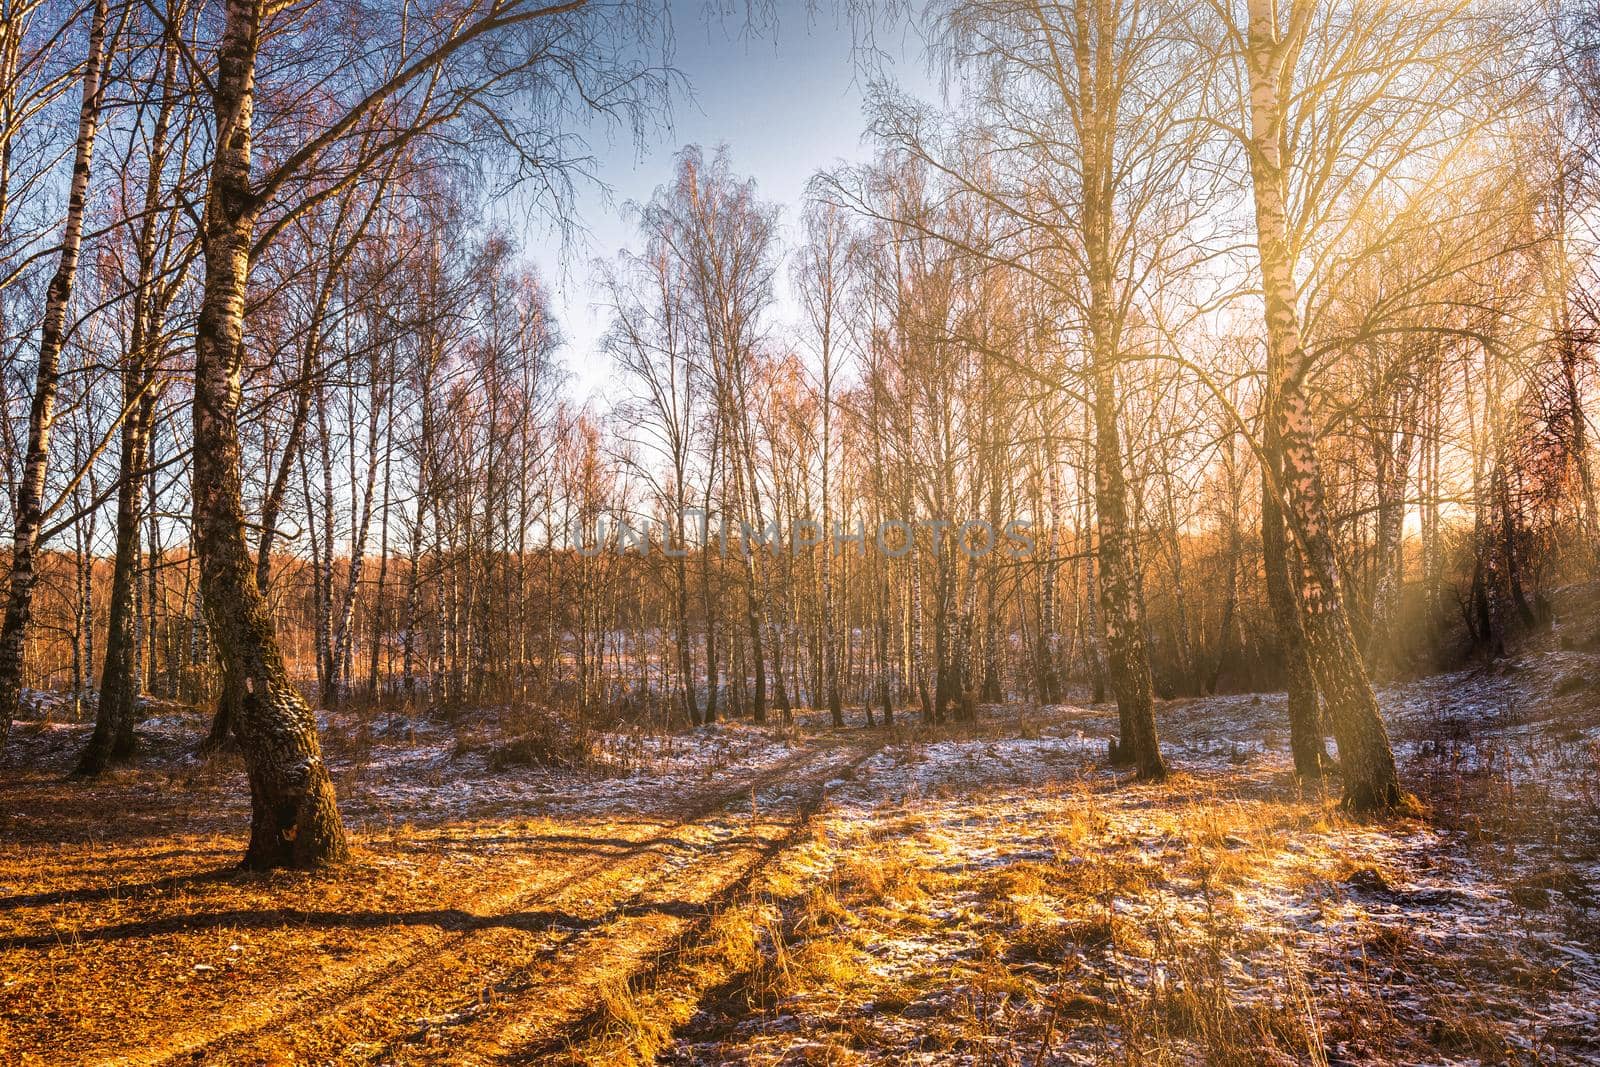 Sunset or sunrise in a birch grove with a first winter snow. Rows of birch trunks with the sun's rays. by Eugene_Yemelyanov